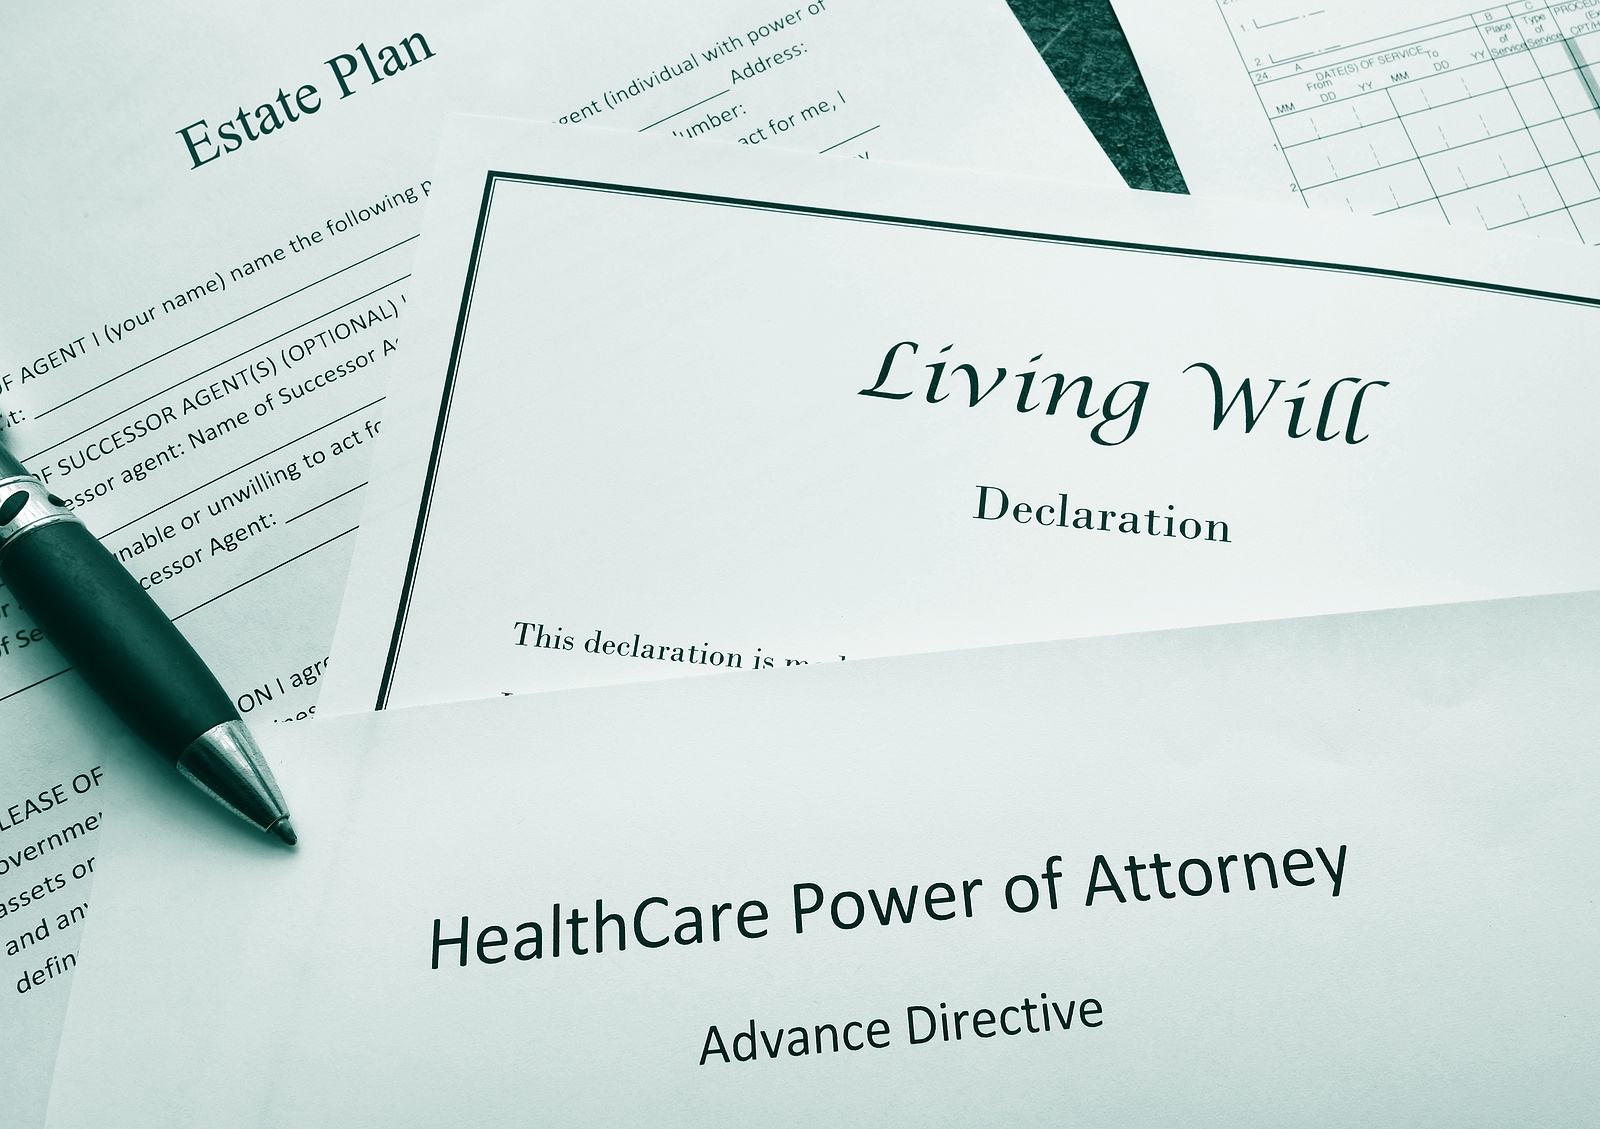 Estate plan, living will, and healthcare power of attorney advance directive documents are displayed.